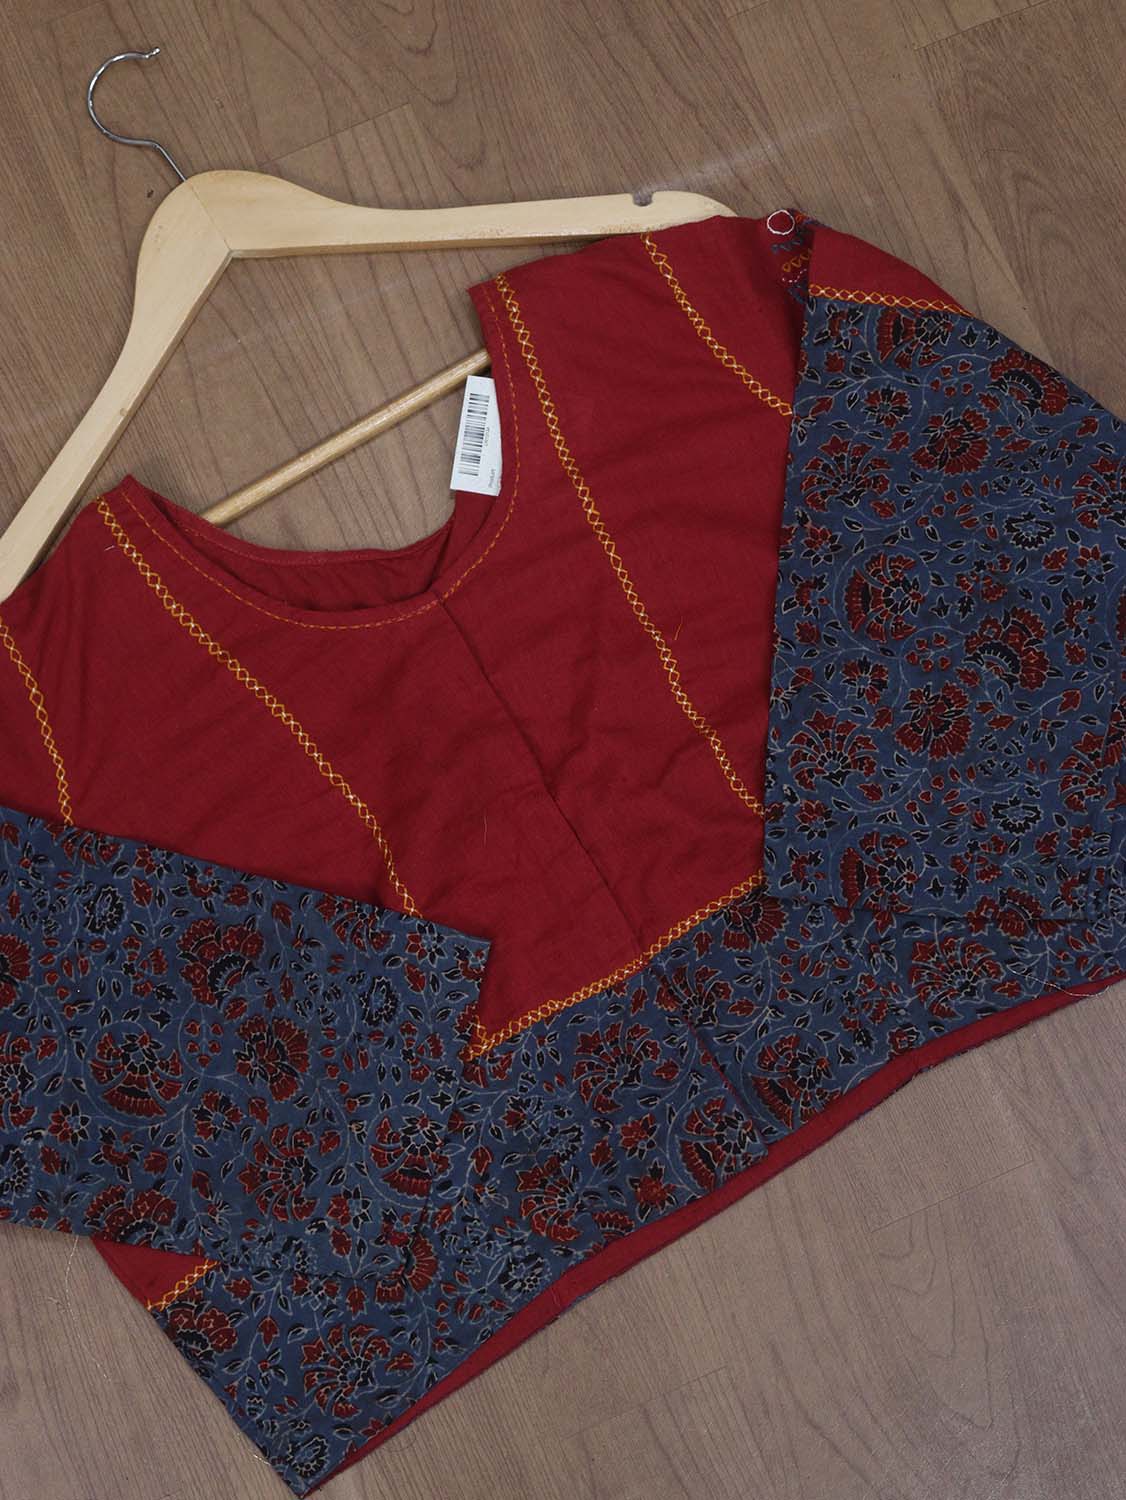 Red and Blue Ajrakh Block Printed Cotton Blouse - Stitched for Comfort - Luxurion World